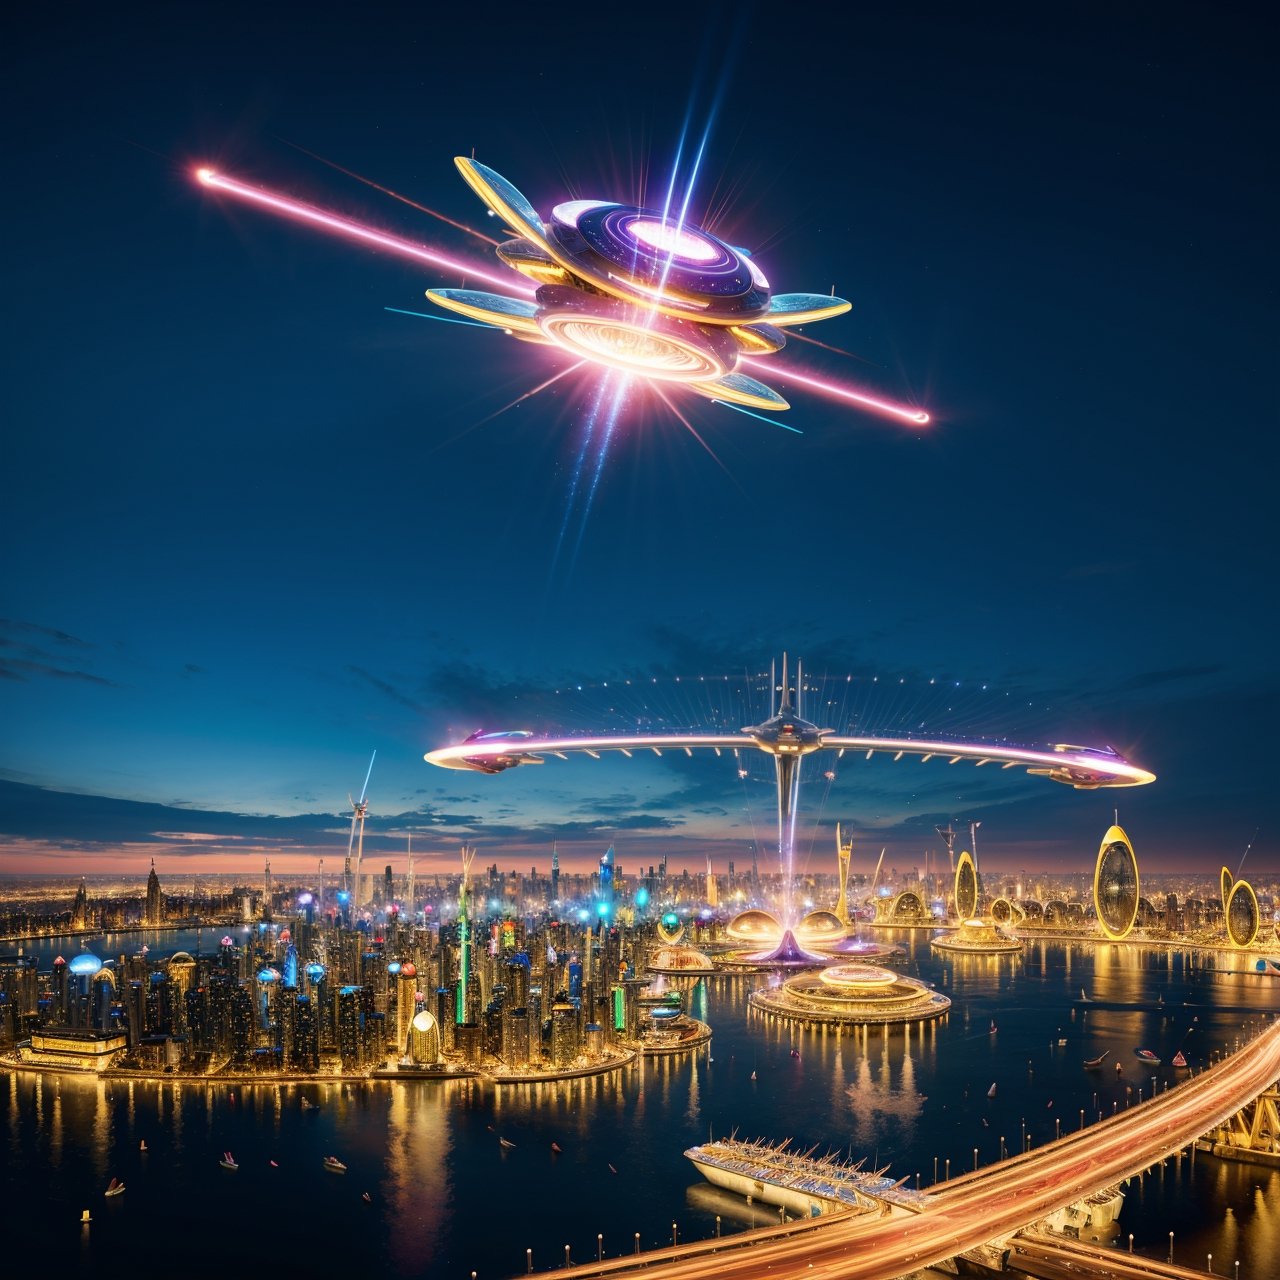 Create futuristic hyperealist works of art, Imagine a floating city in the sky, with complex architectural structures and advanced technology. Paint this futuristic city with a wealth of detail, capturing the bright lights, suspended platforms and flying vehicles that crisscross the skies.